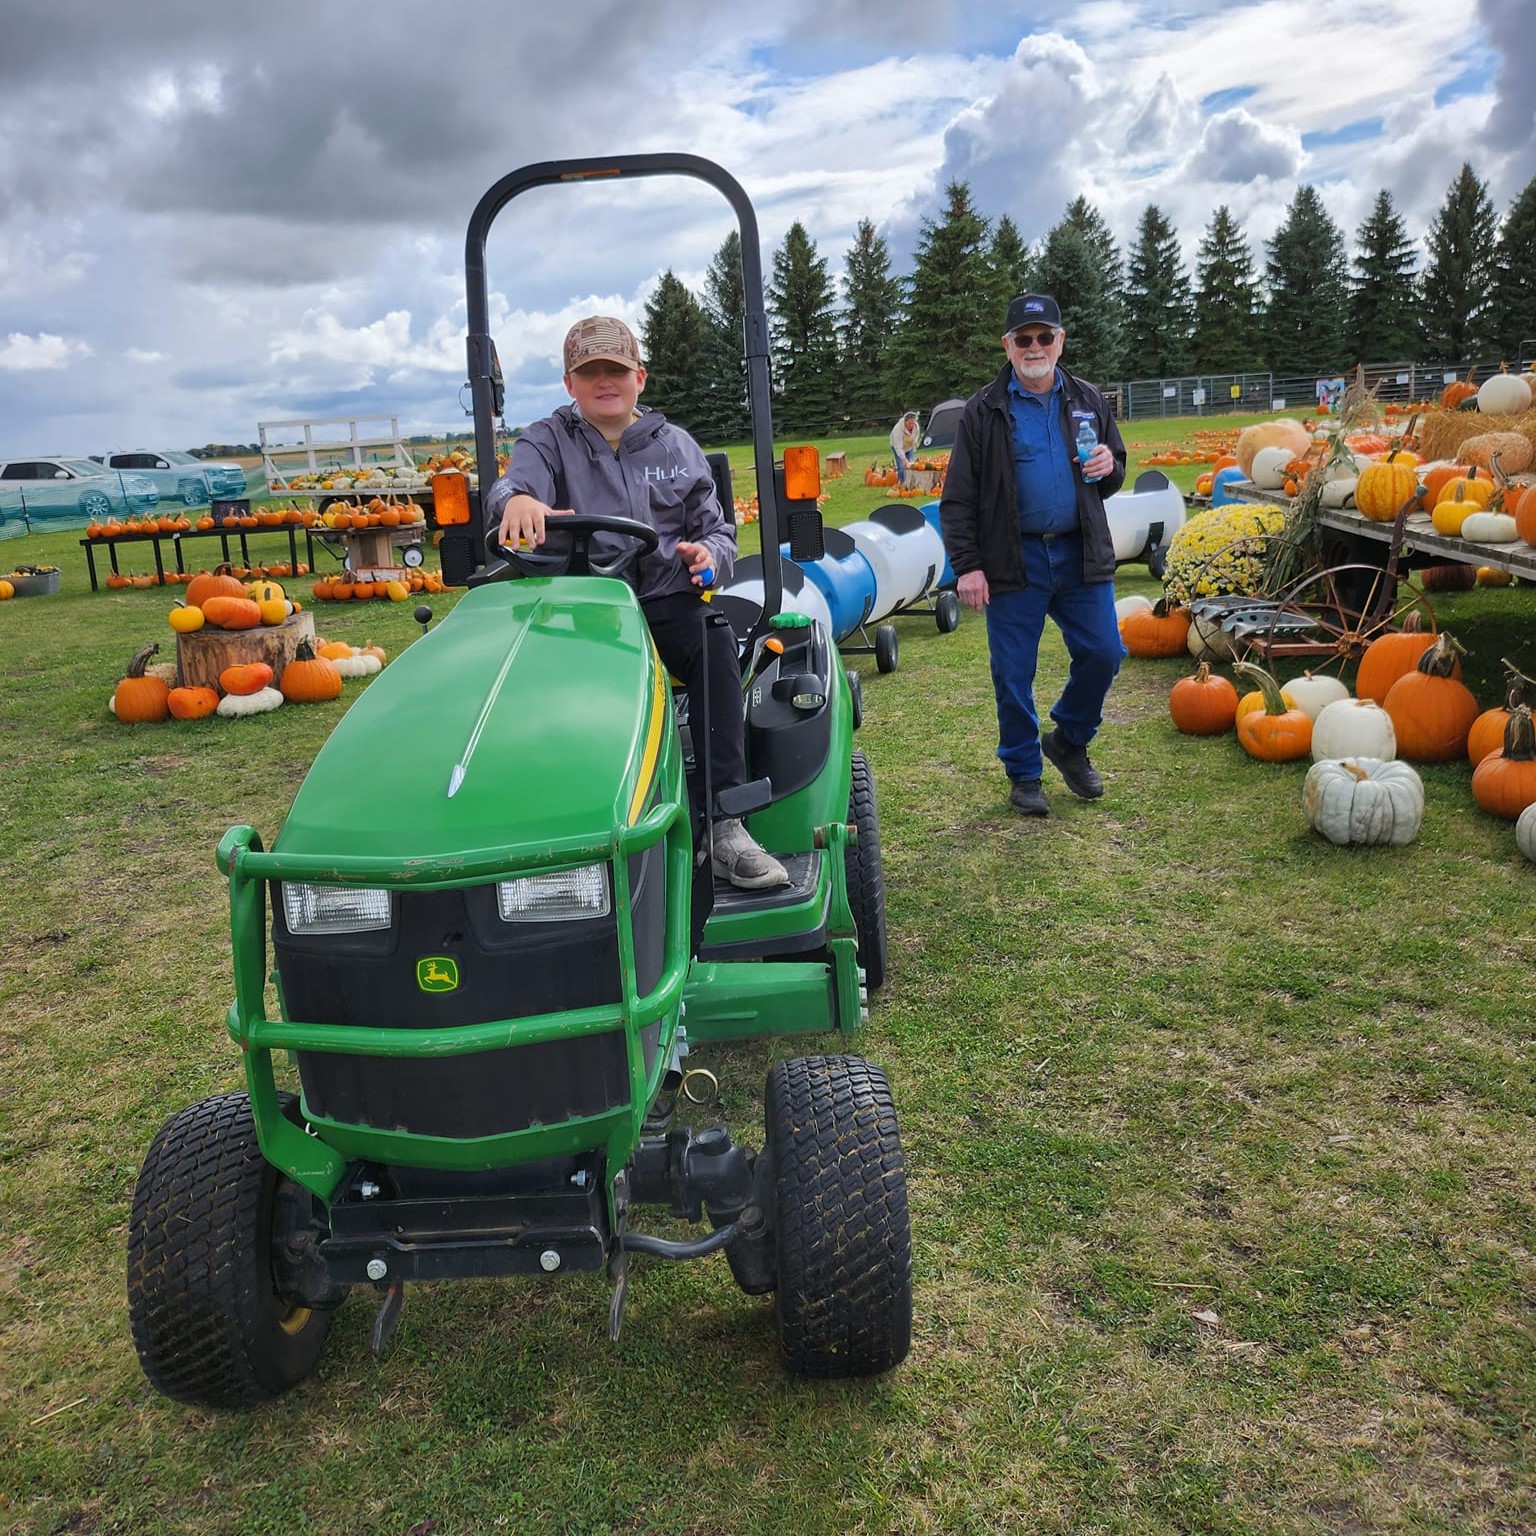 A young gentleman rides a green John Deer tractor that hauls a train of cars for children to sit in. He passes in front of a background of pumpkins while another gentleman looks on.